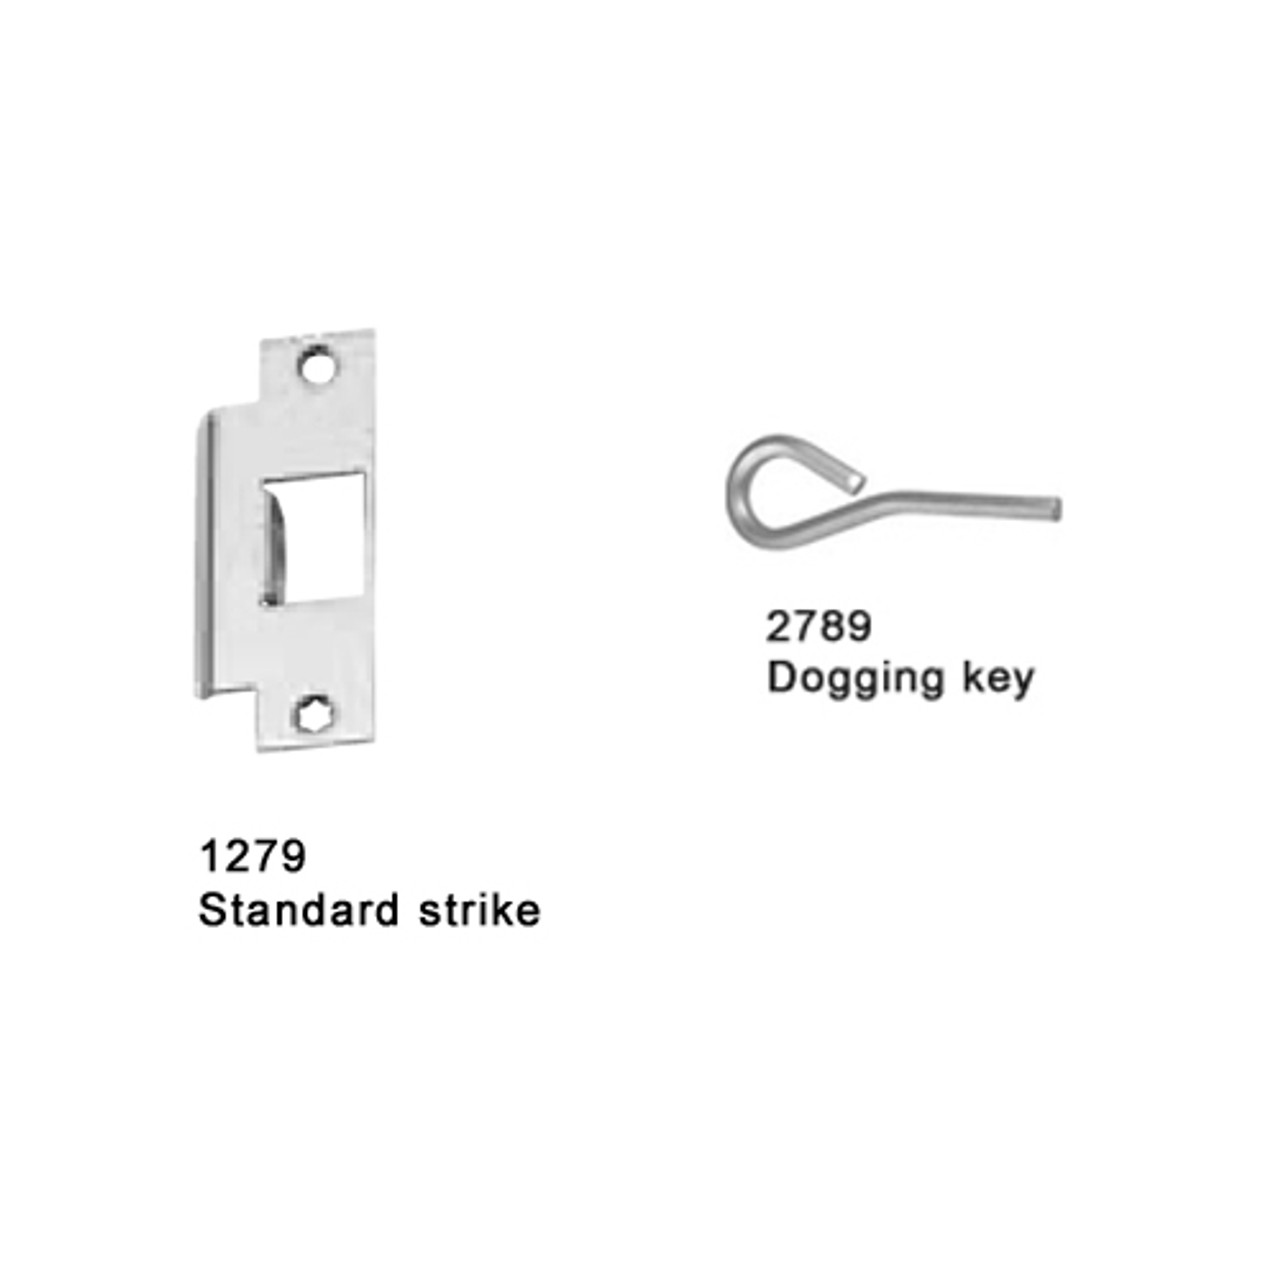 25-M-L-DANE-US15-4-LHR Falcon 25 Series Mortise Lock Devices with 510L Dane Lever Trim in Satin Nickel